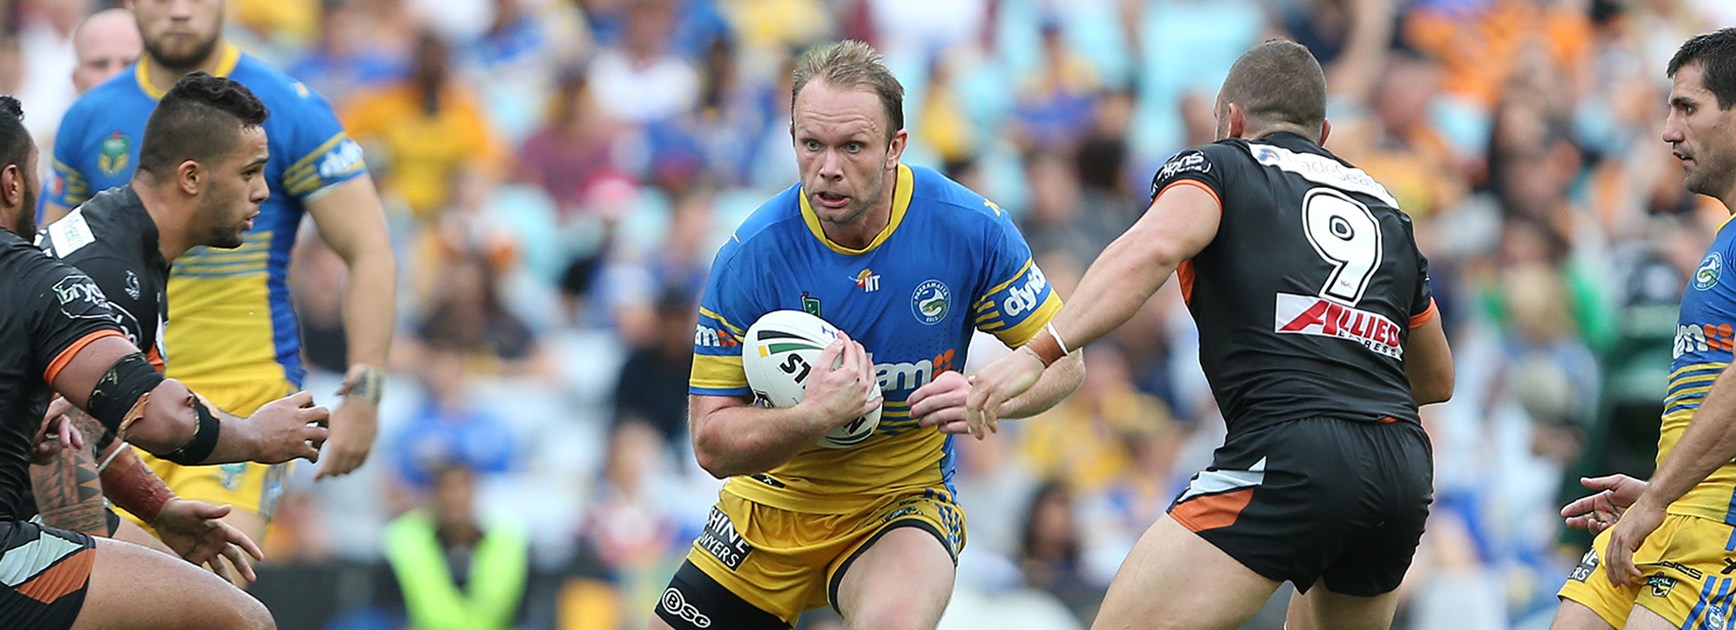 Eels forward David Gower in action against Wests Tigers in Round 4 of the NRL Telstra Premiership.